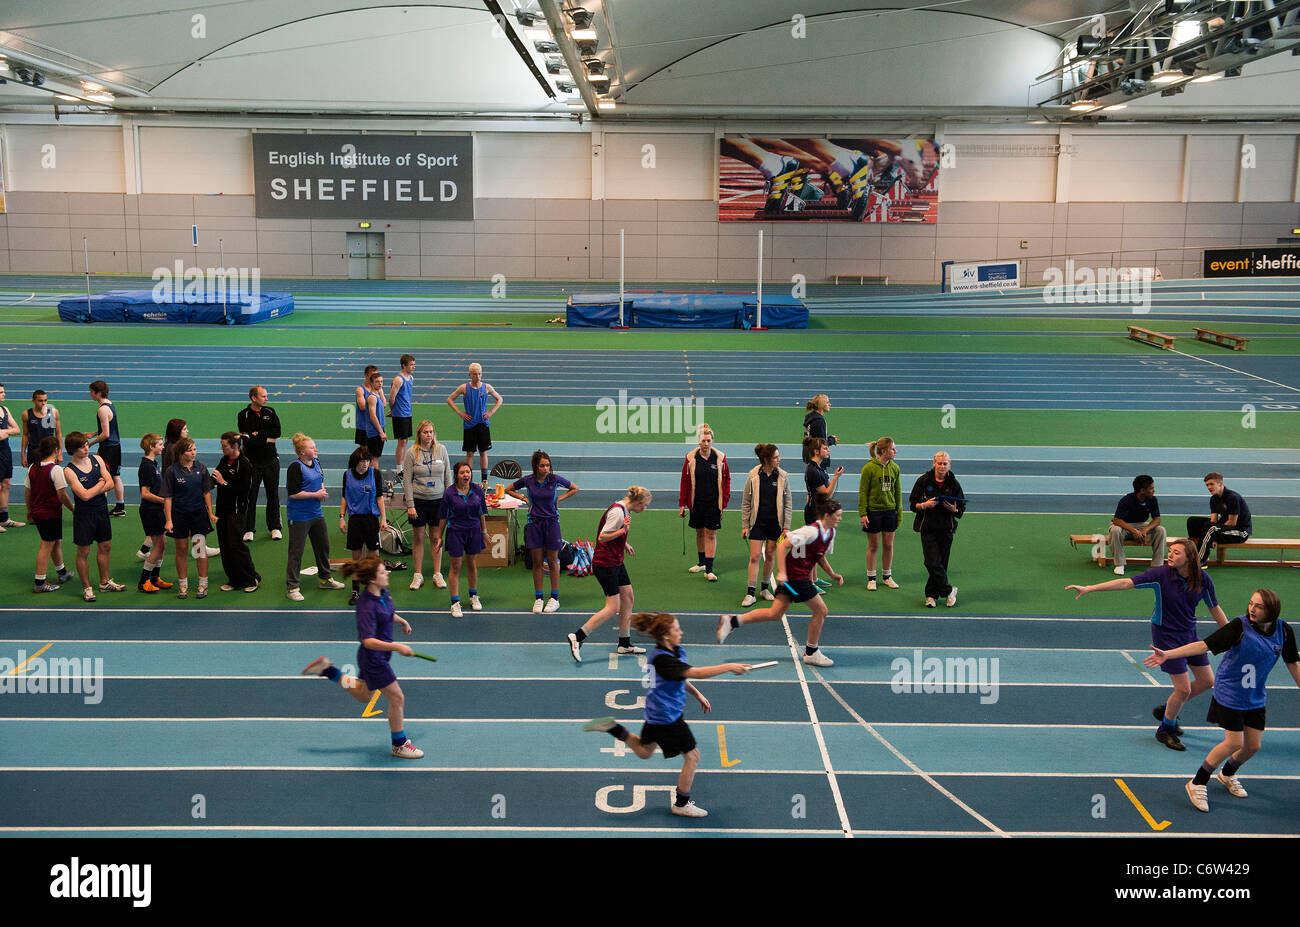 Secondary school children compete in a relay race at the English Institute of Sport in Sheffield, UK Stock Photo